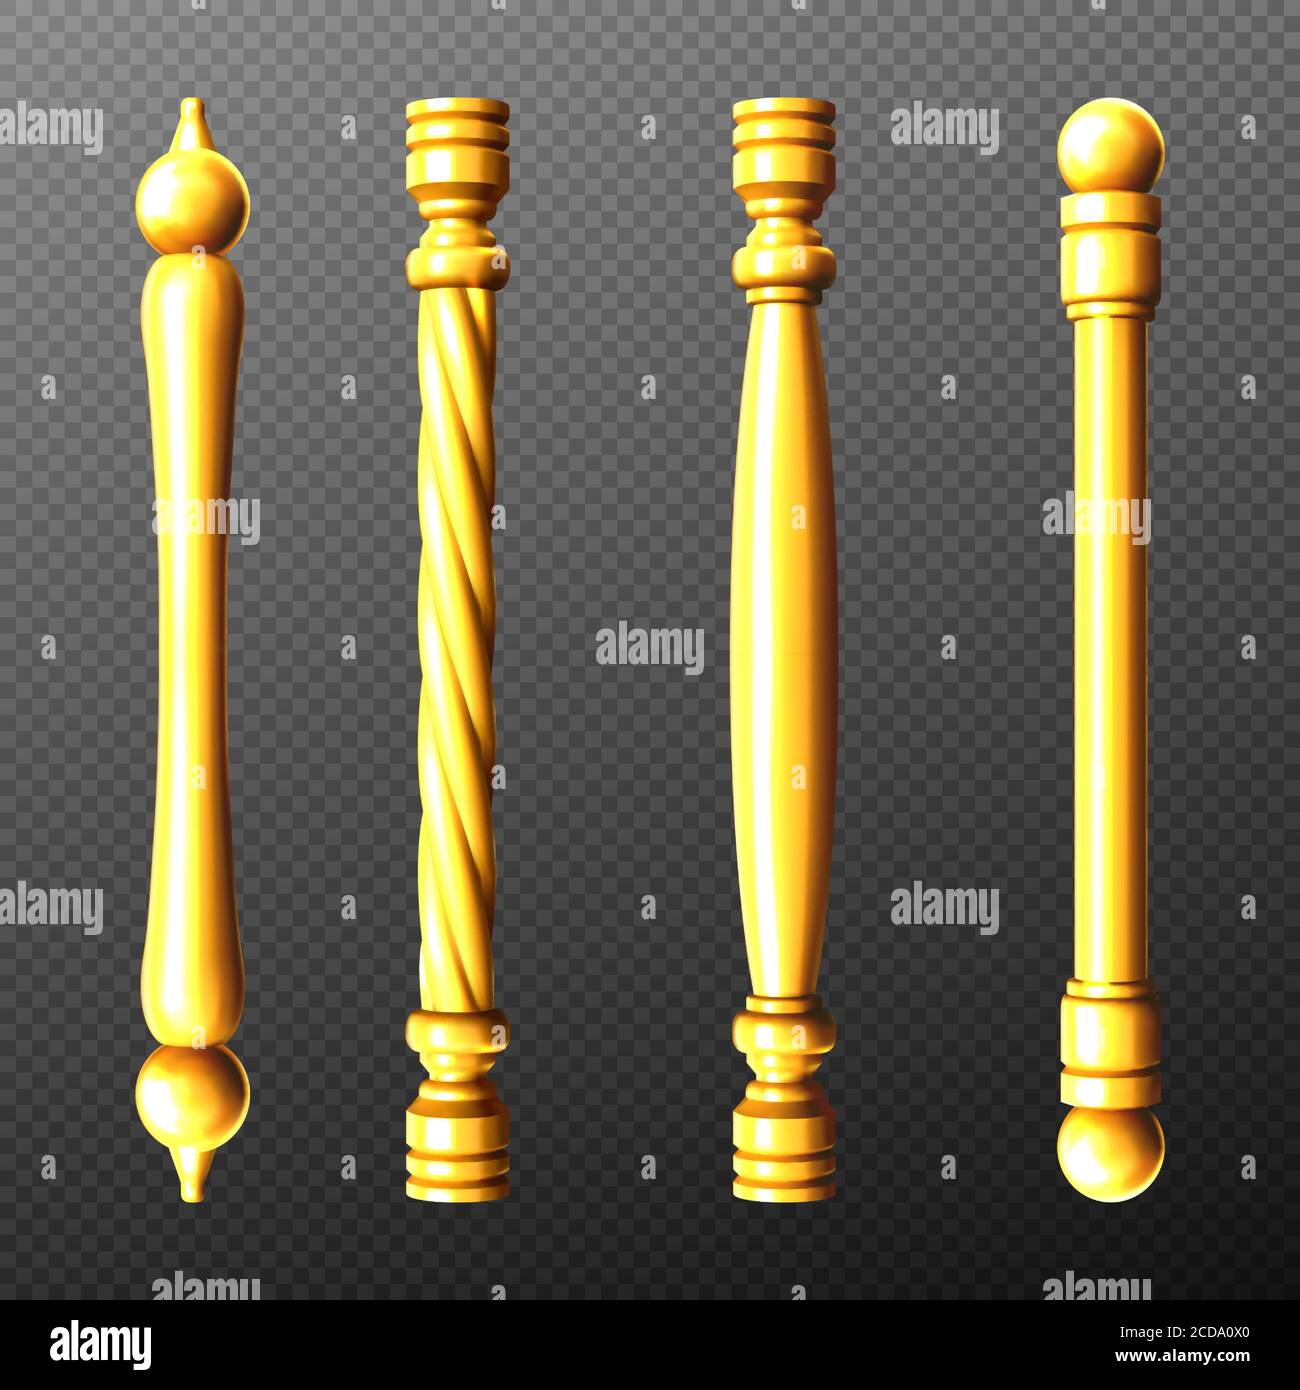 Gold door handles, column and twisted knobs bar shapes isolated on transparent background. Golden doorknob elements for interior design, yellow metal home decor, Realistic 3d vector icons, clipart set Stock Vector